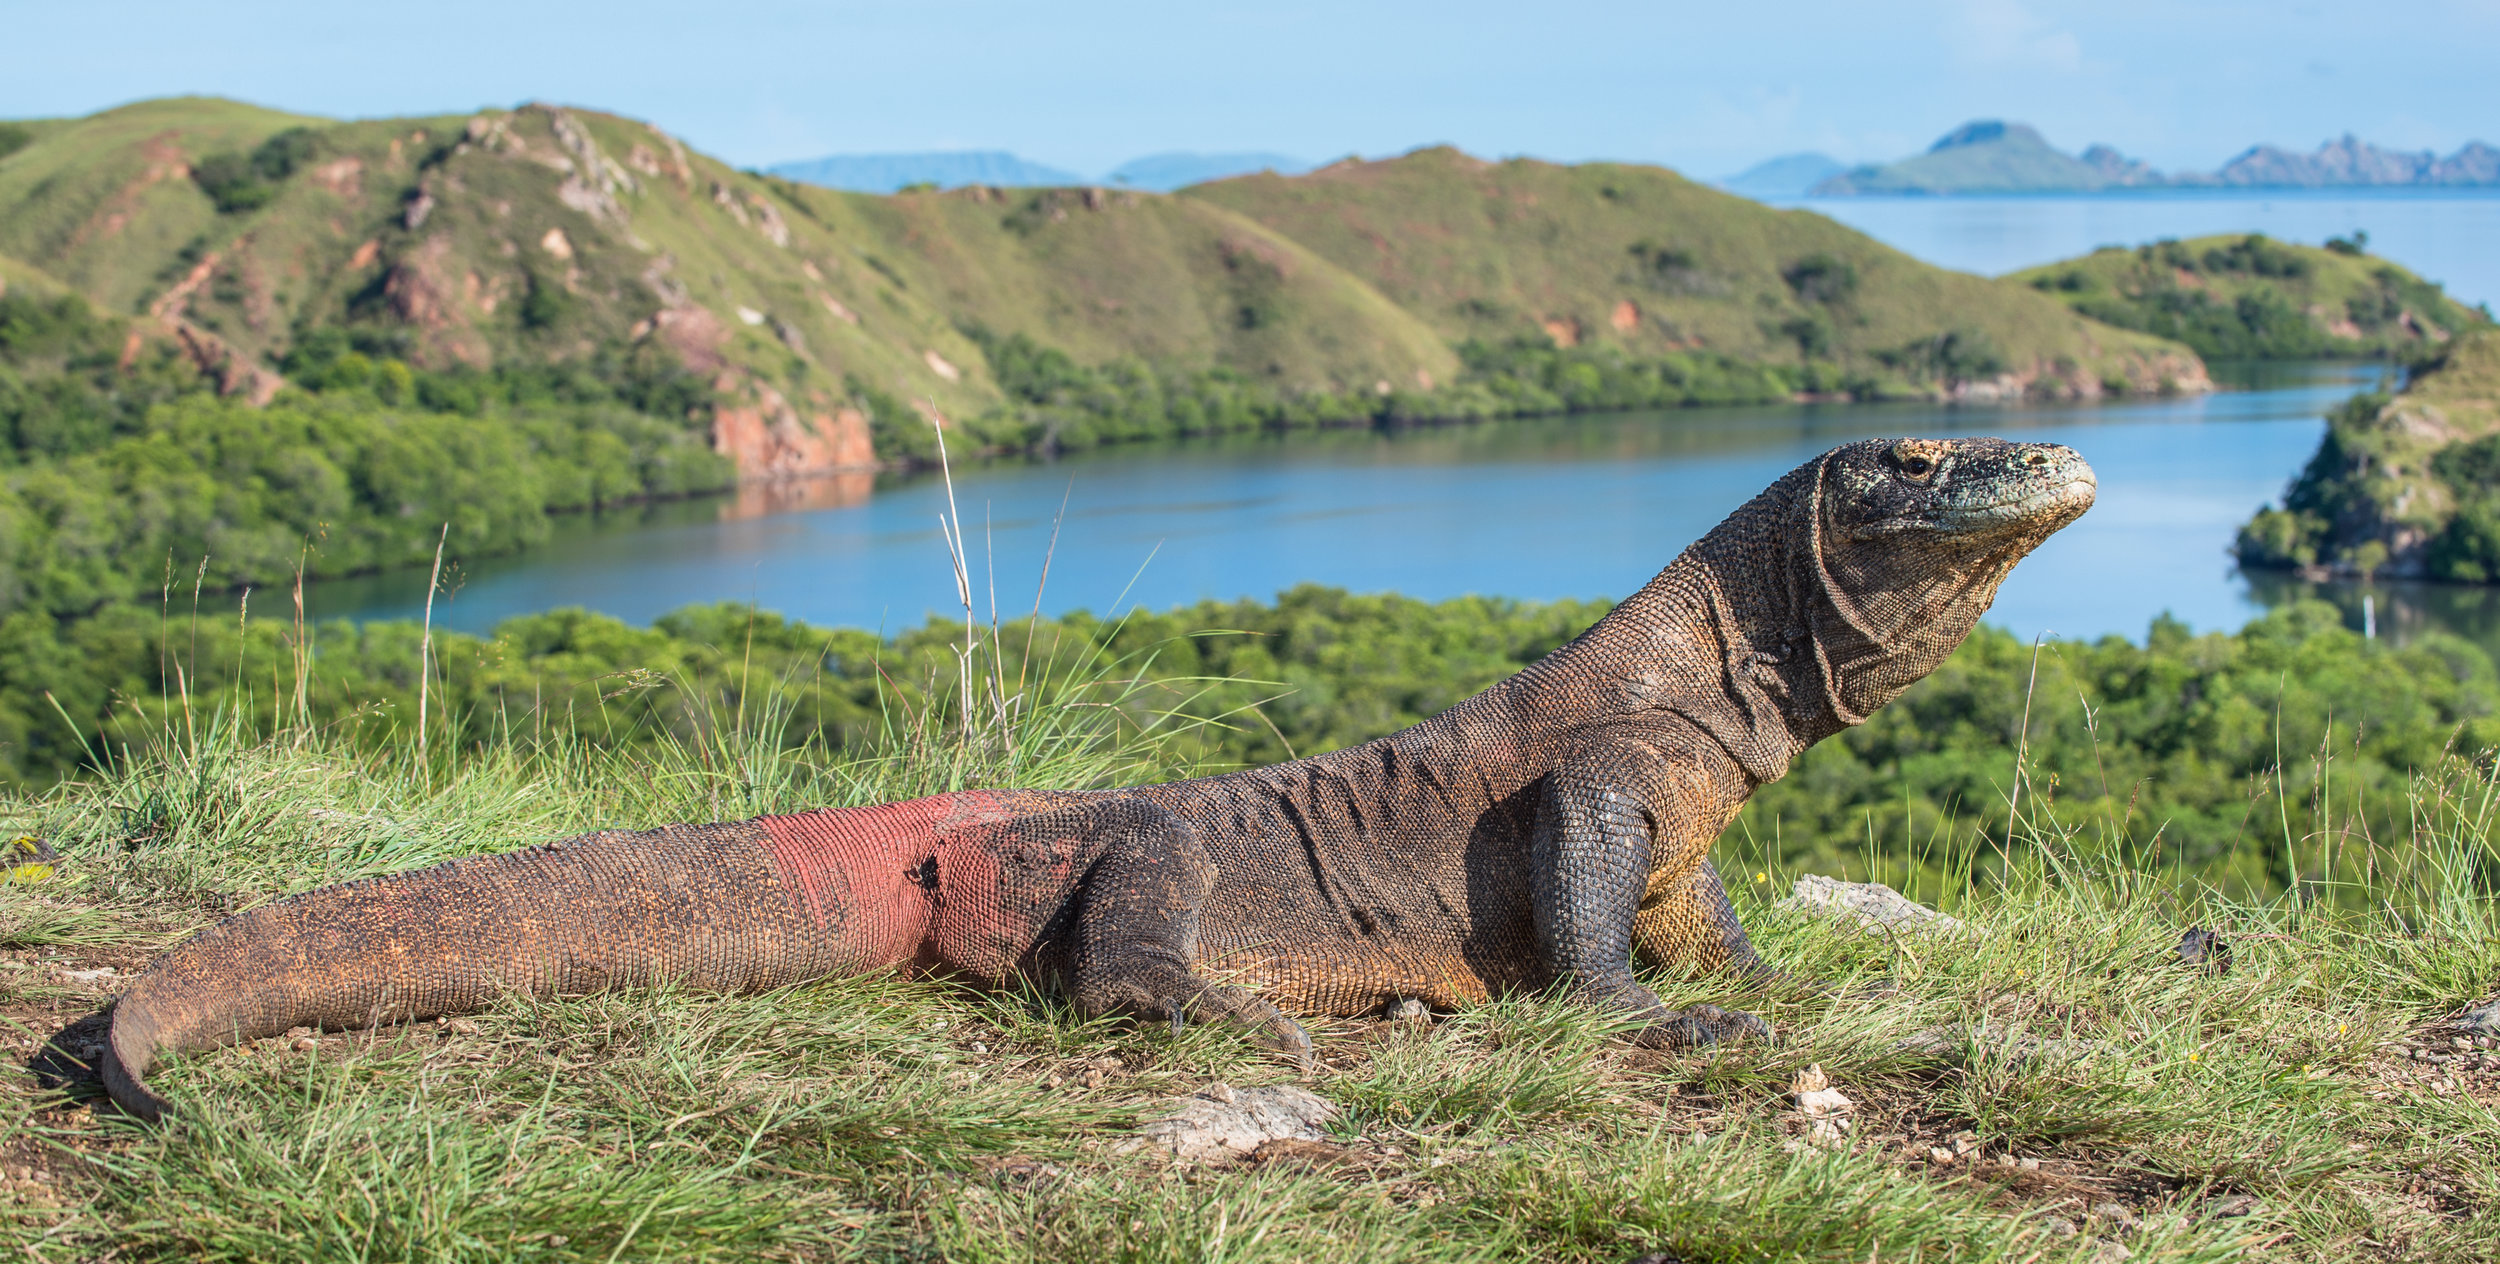 In Response To Increased Dragon Smuggling, Komodo Island Will Be Closed To Tourists